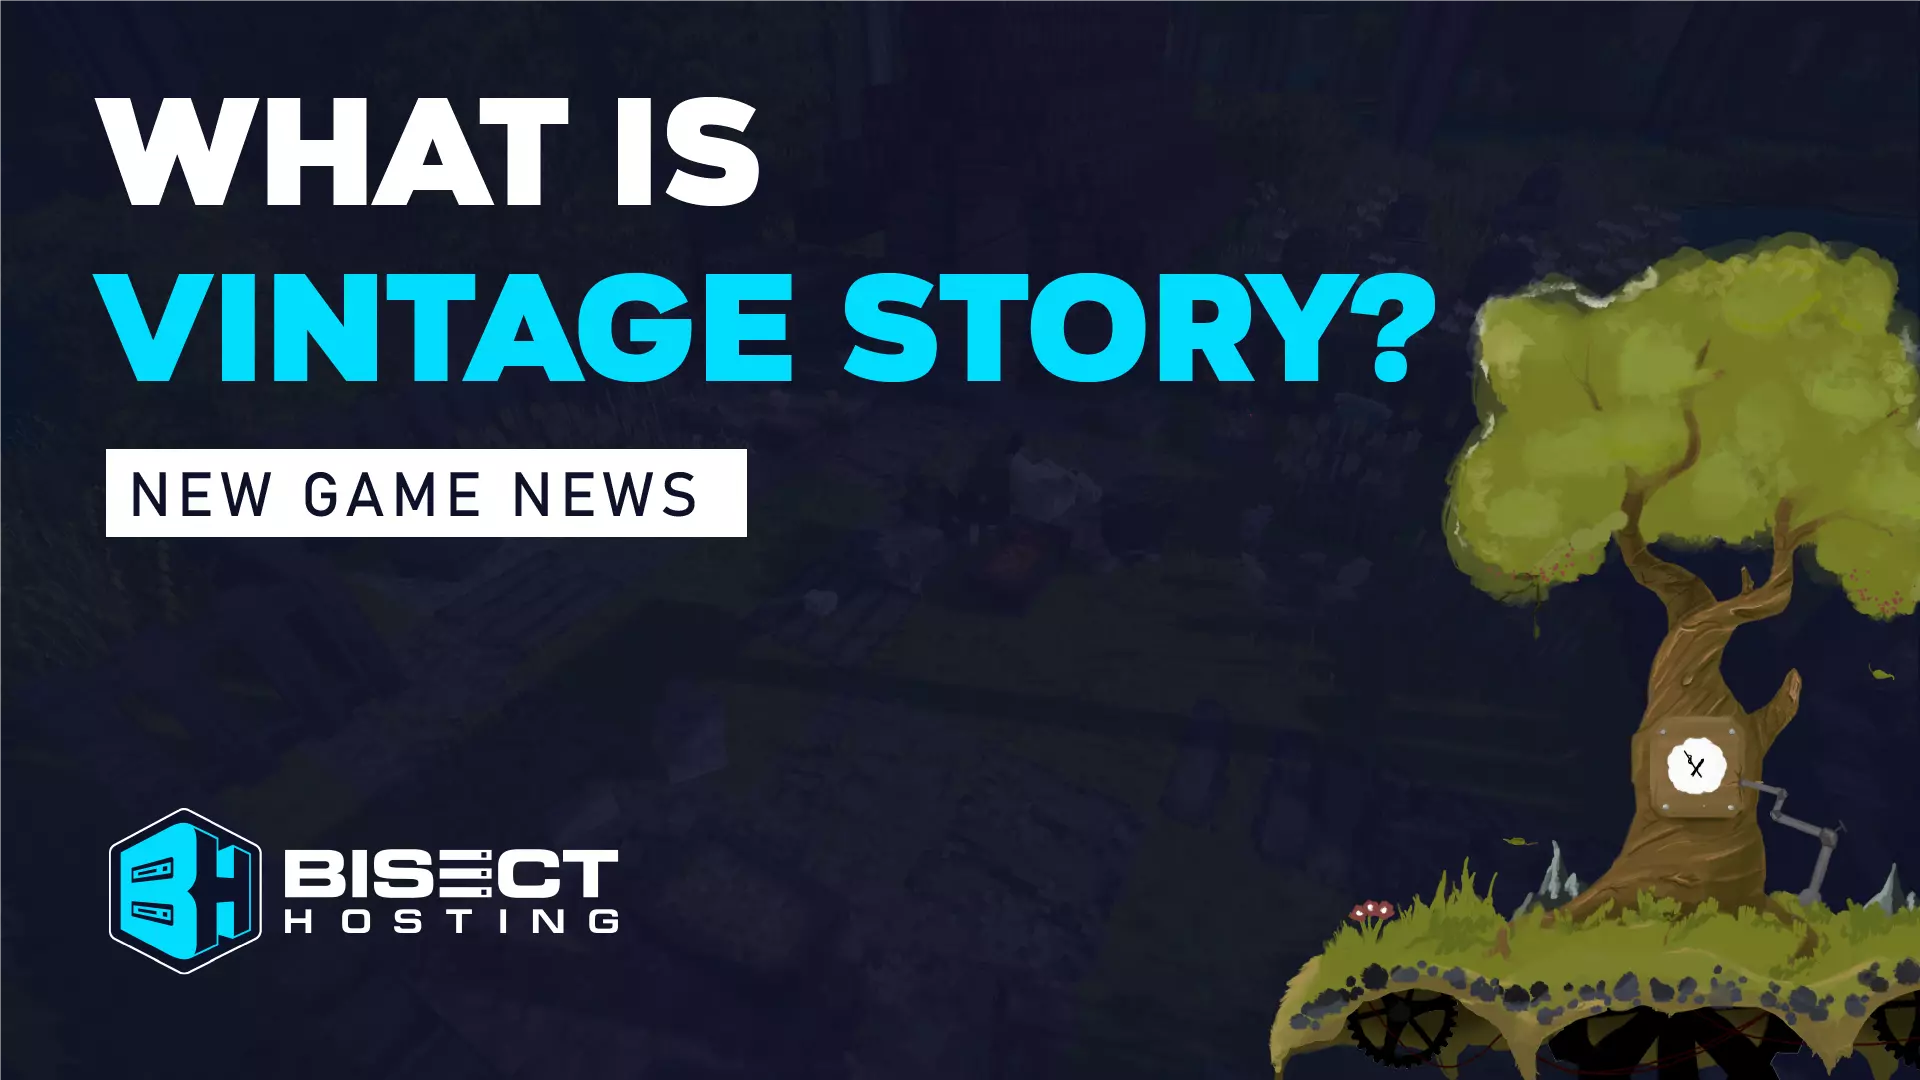 What Is Vintage Story?